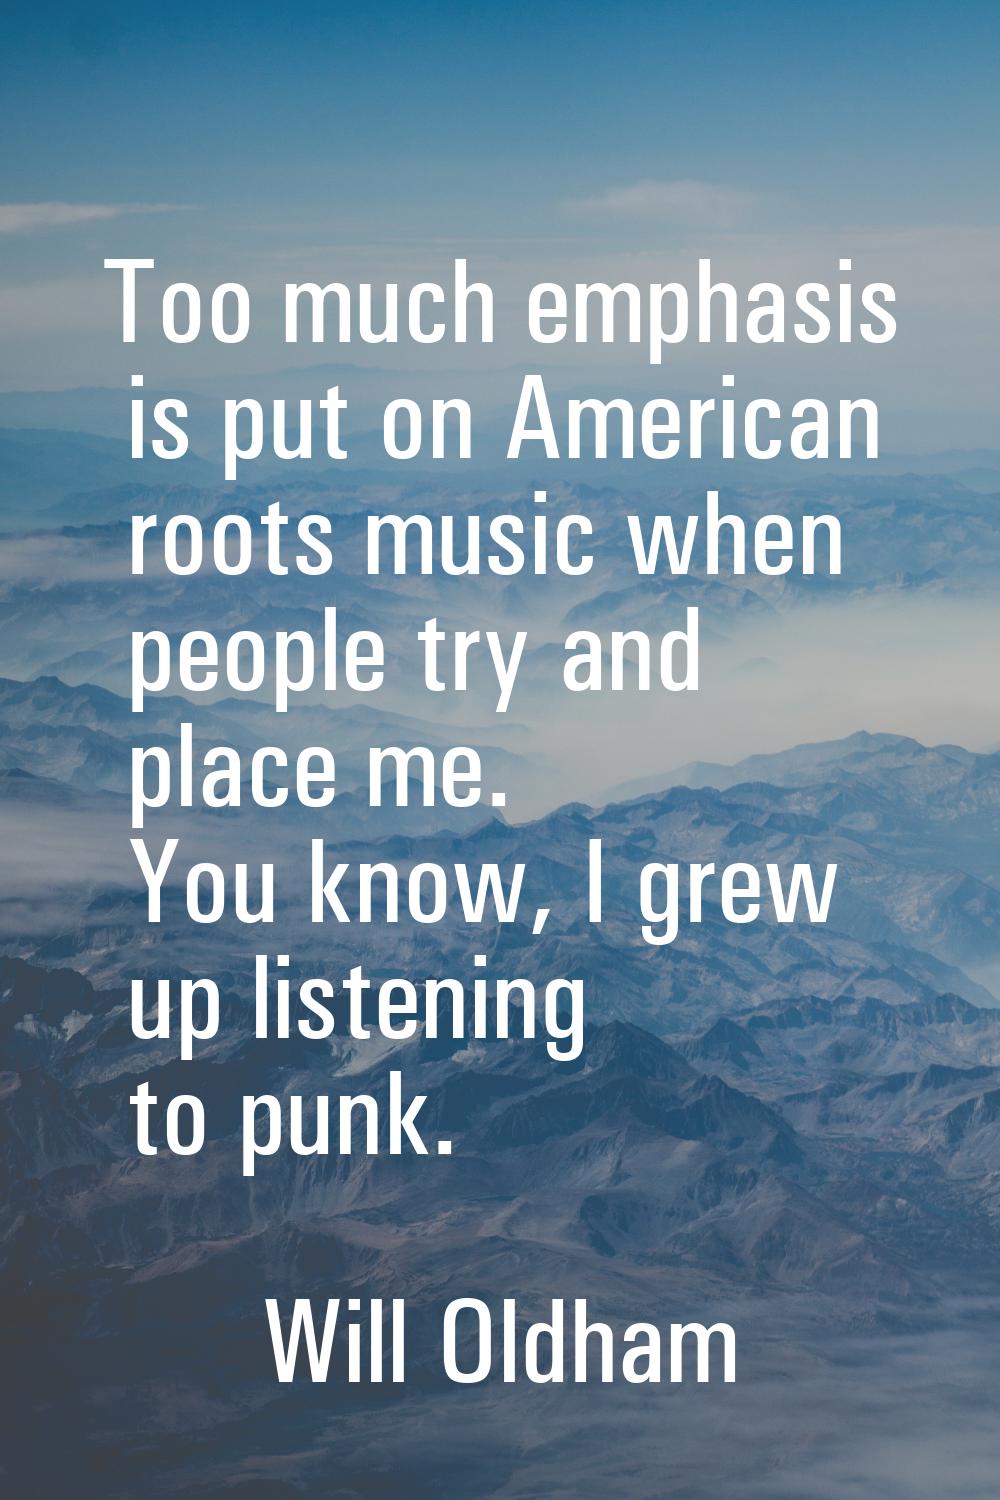 Too much emphasis is put on American roots music when people try and place me. You know, I grew up 